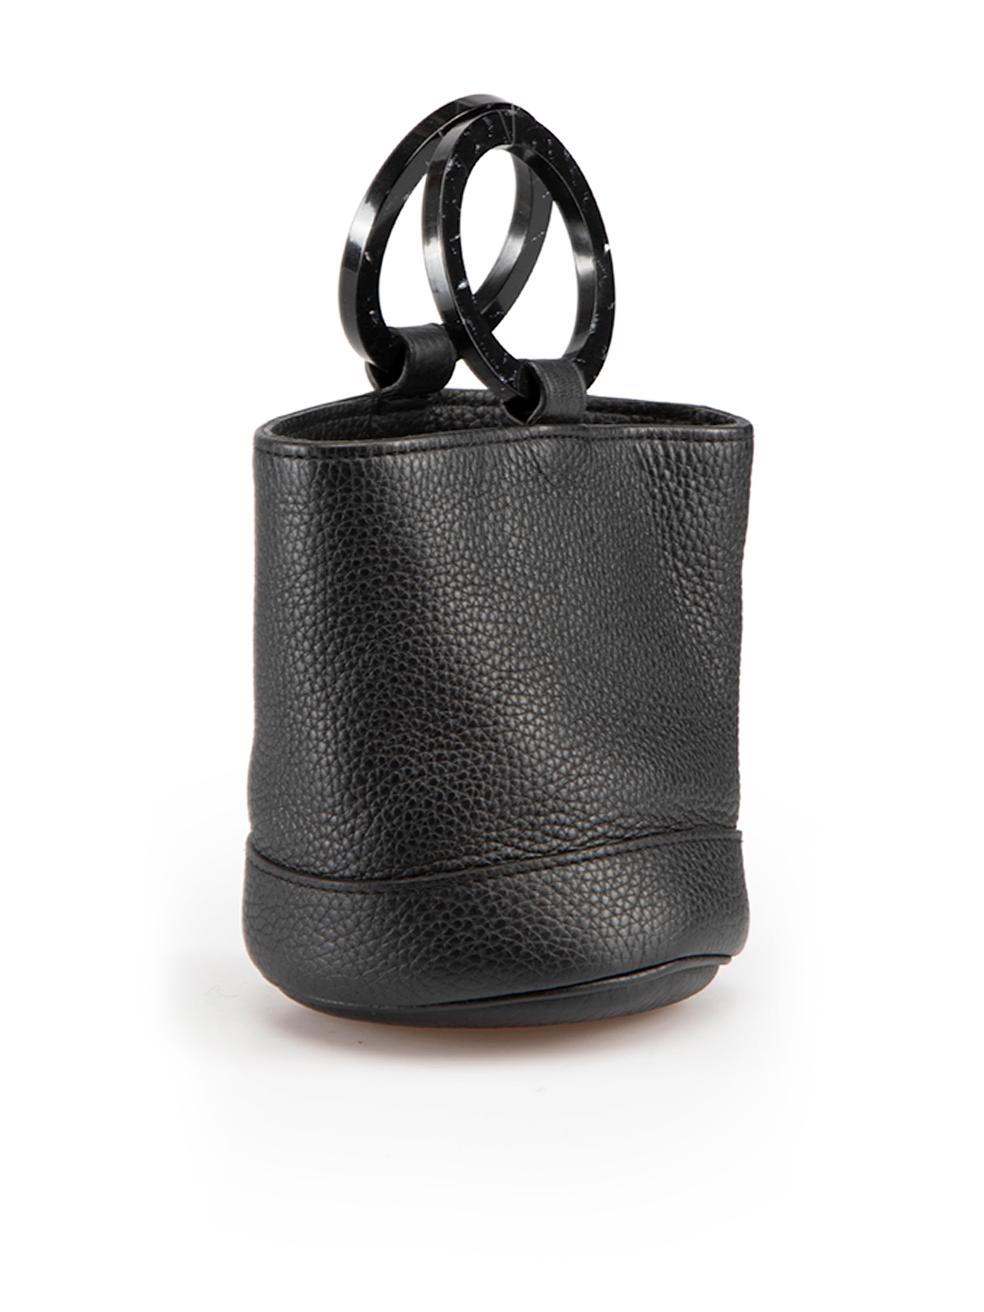 CONDITION is Very good. Hardly any visible wear to bag is evident on this used Simon Miller designer resale item. This item comes with original dust bag.
 
Details
Mini Bonsai
Black
Leather
Mini bucket bag
1x Main open compartment
2x Round handles
